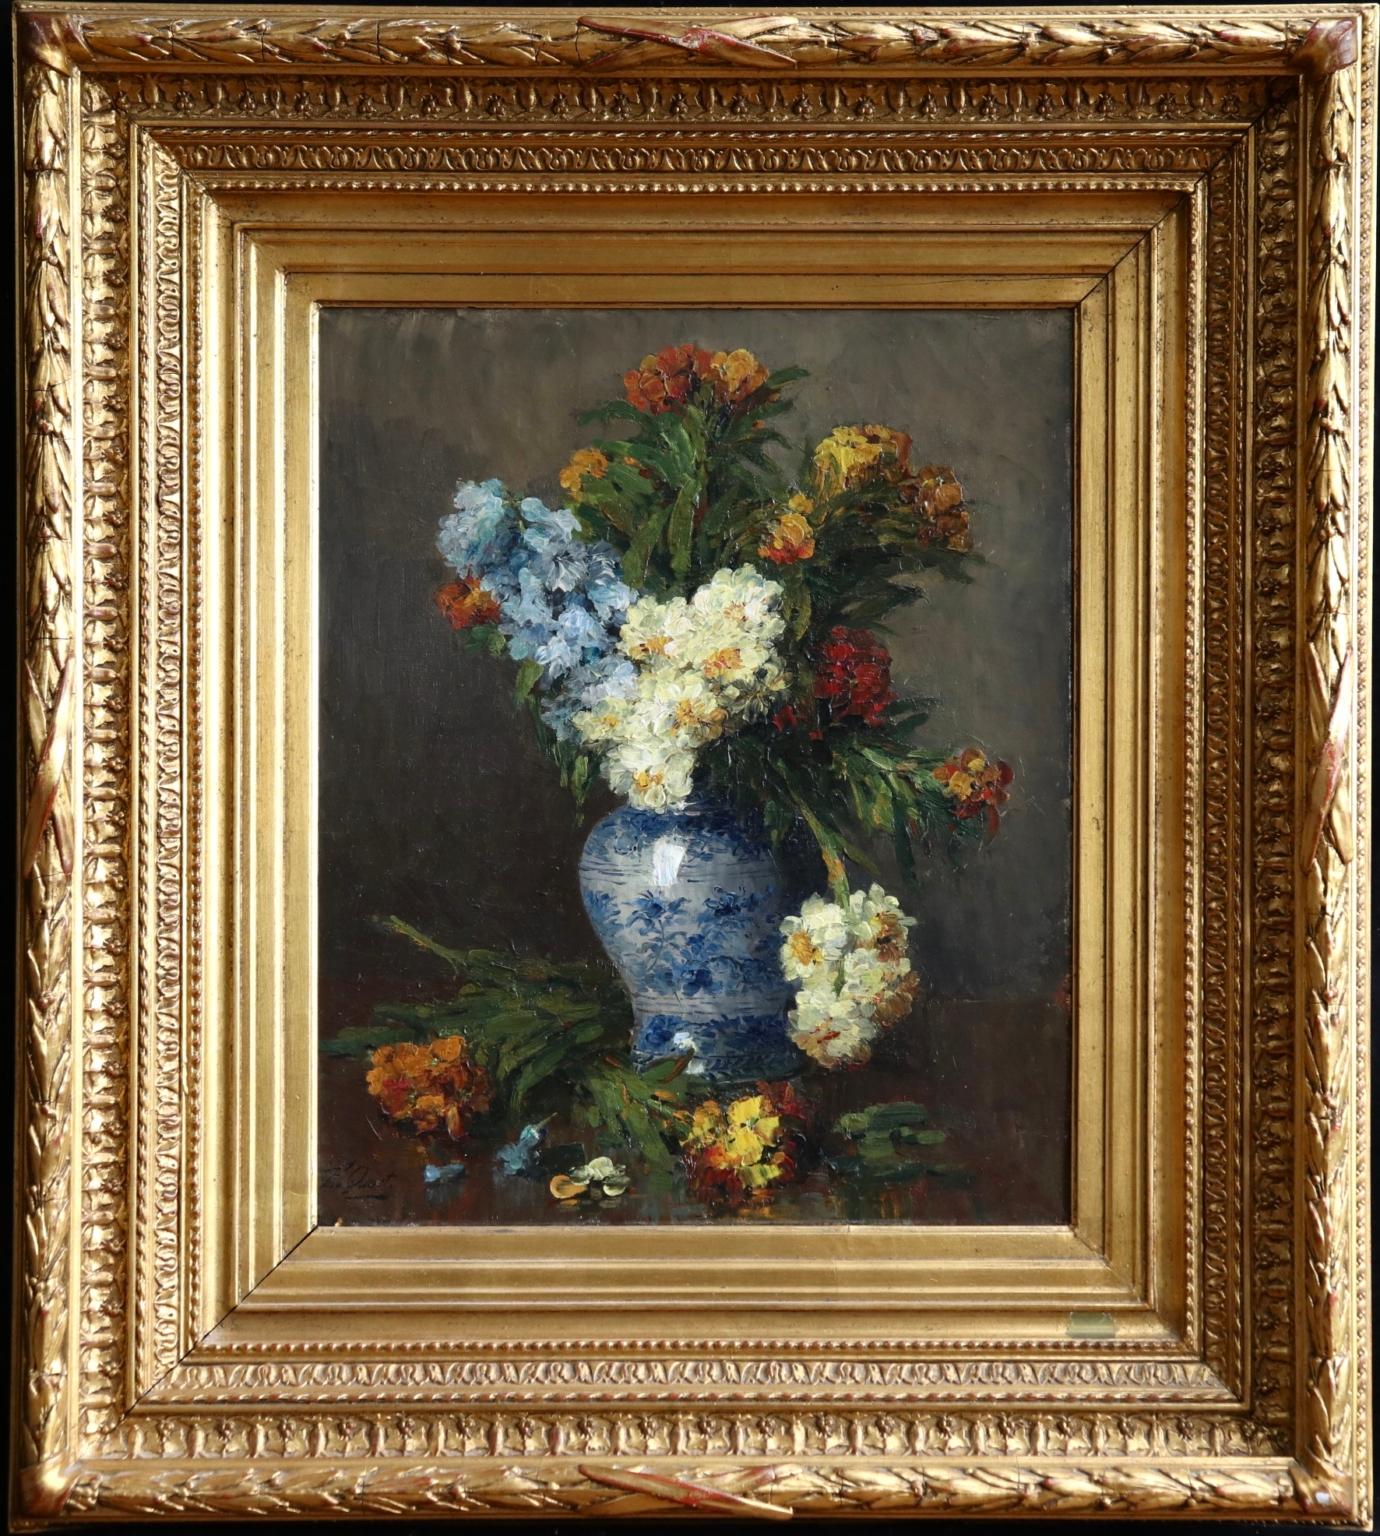 Oil on original canvas by French painter Ernest Quost depicting a blue and white ceramic vase filled with flowers. Signed lower left. Framed dimensions are 29 inches high by 26 inches wide.

This work carries its original Exhibition label